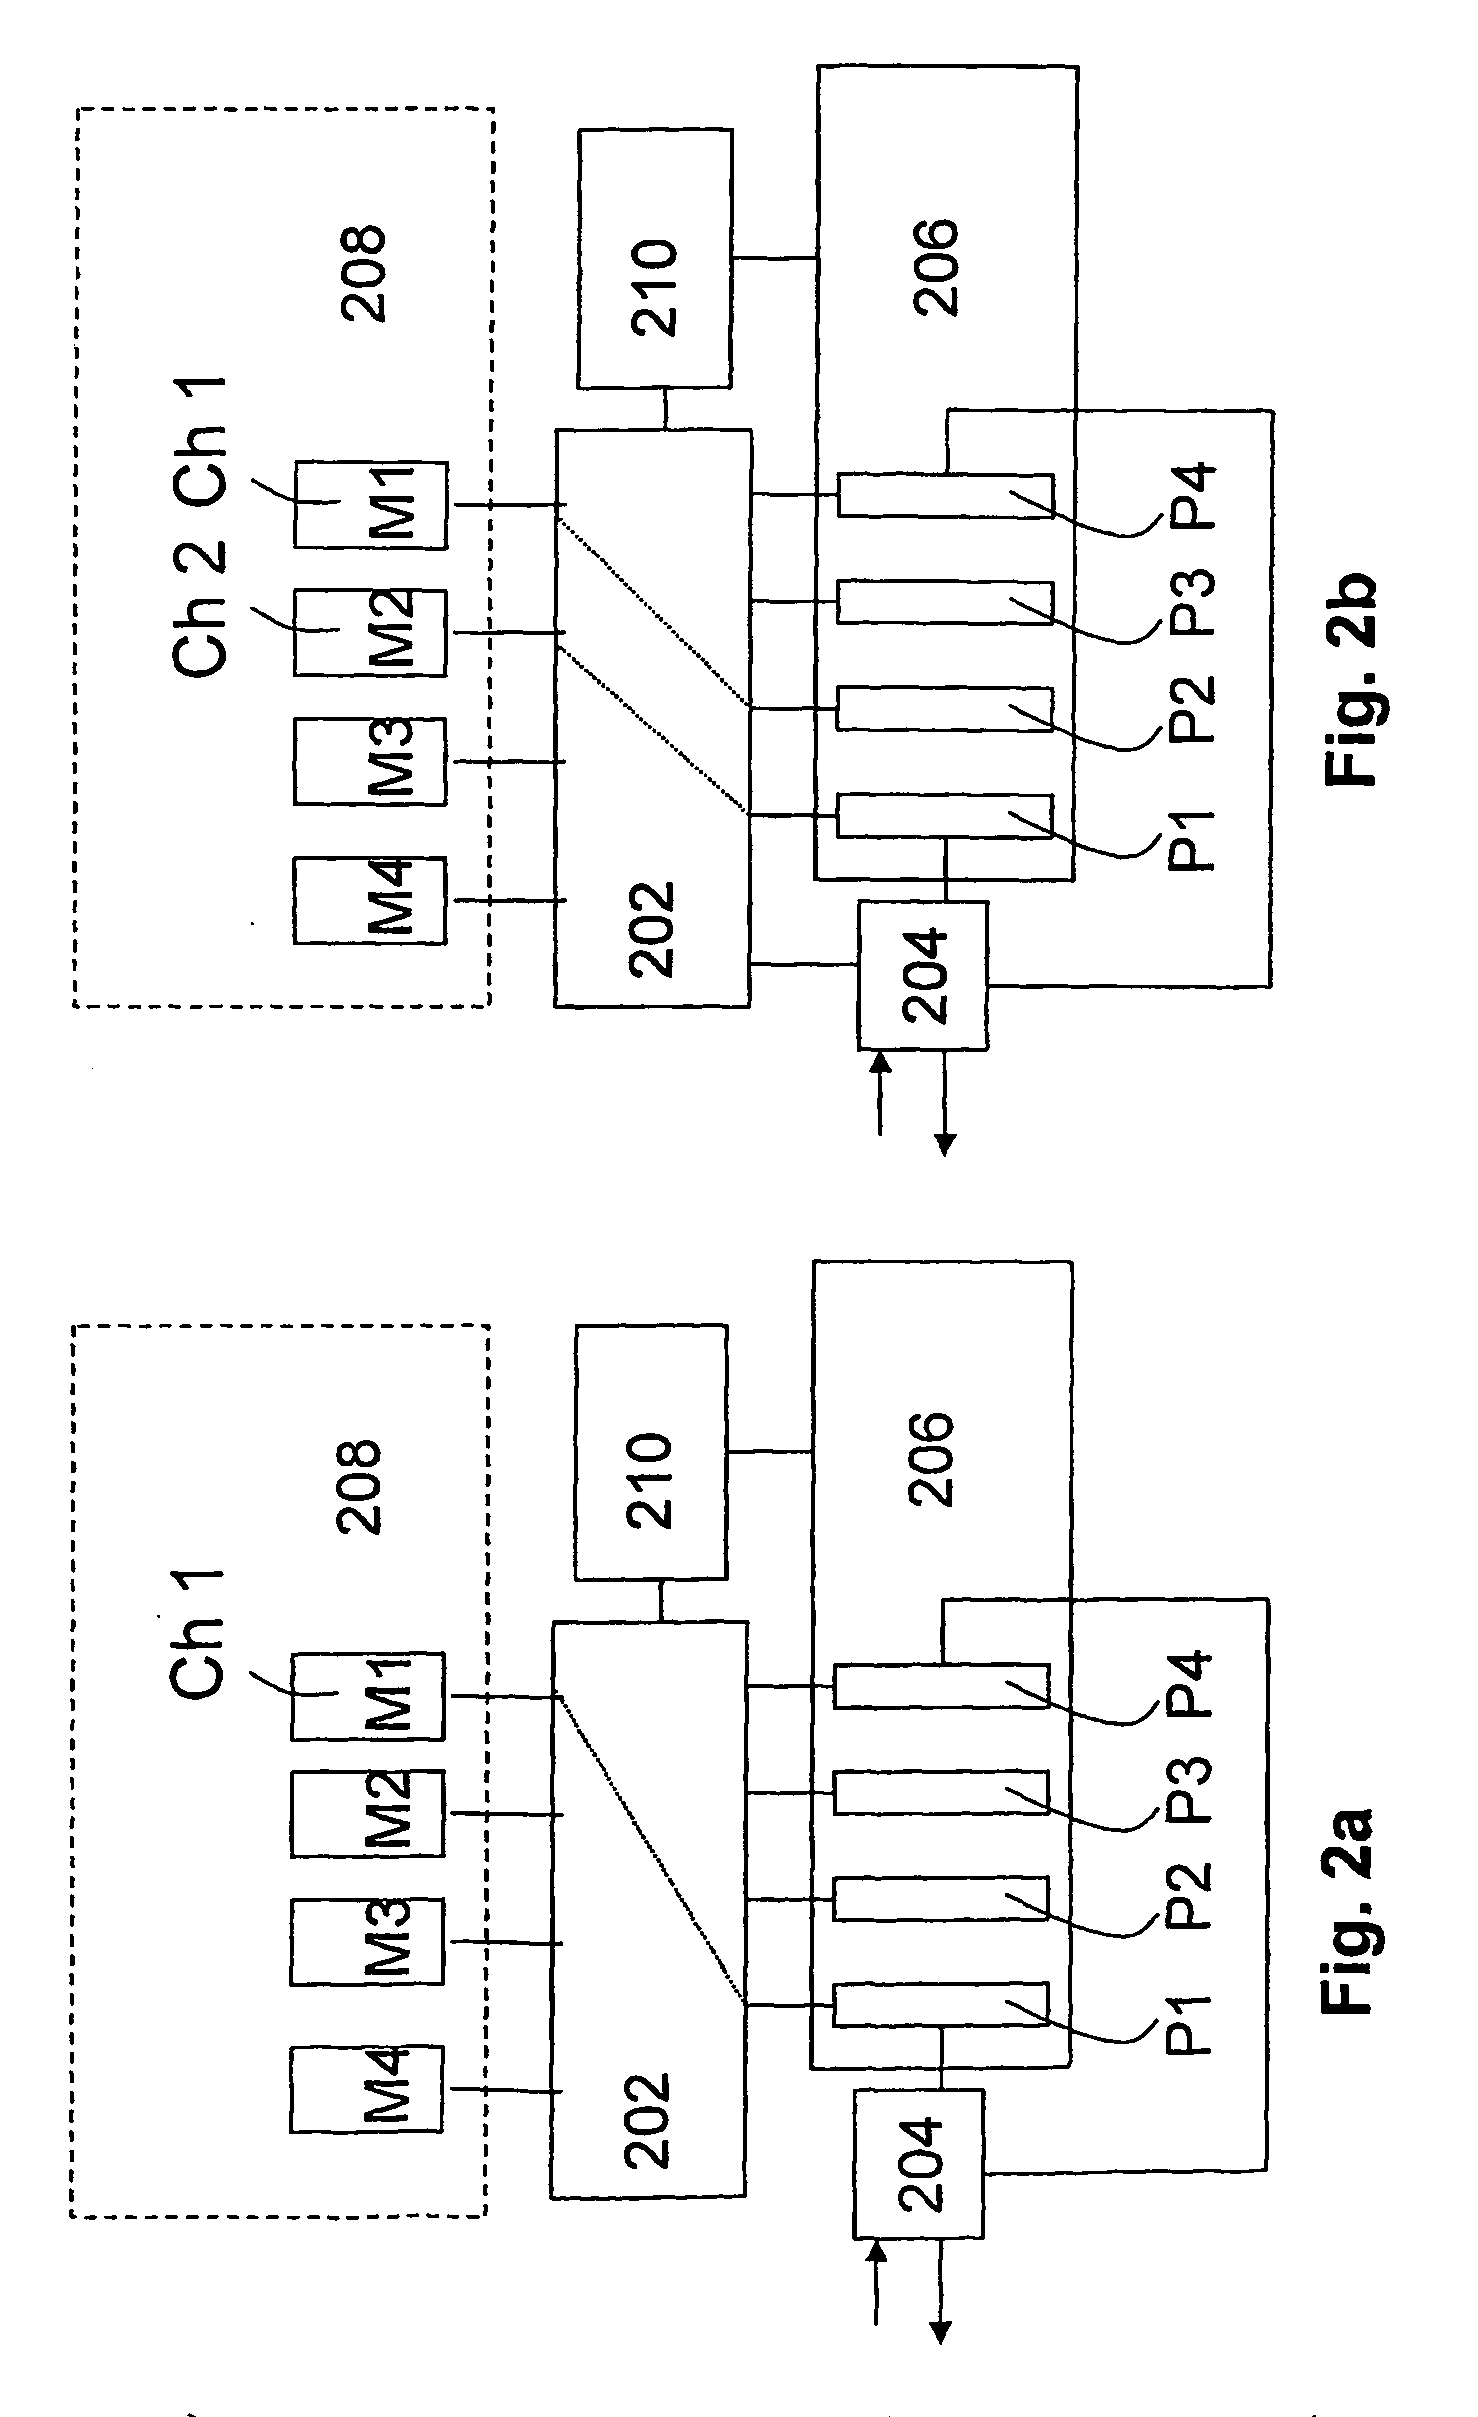 Method for processing data streams divided into a plurality of process steps